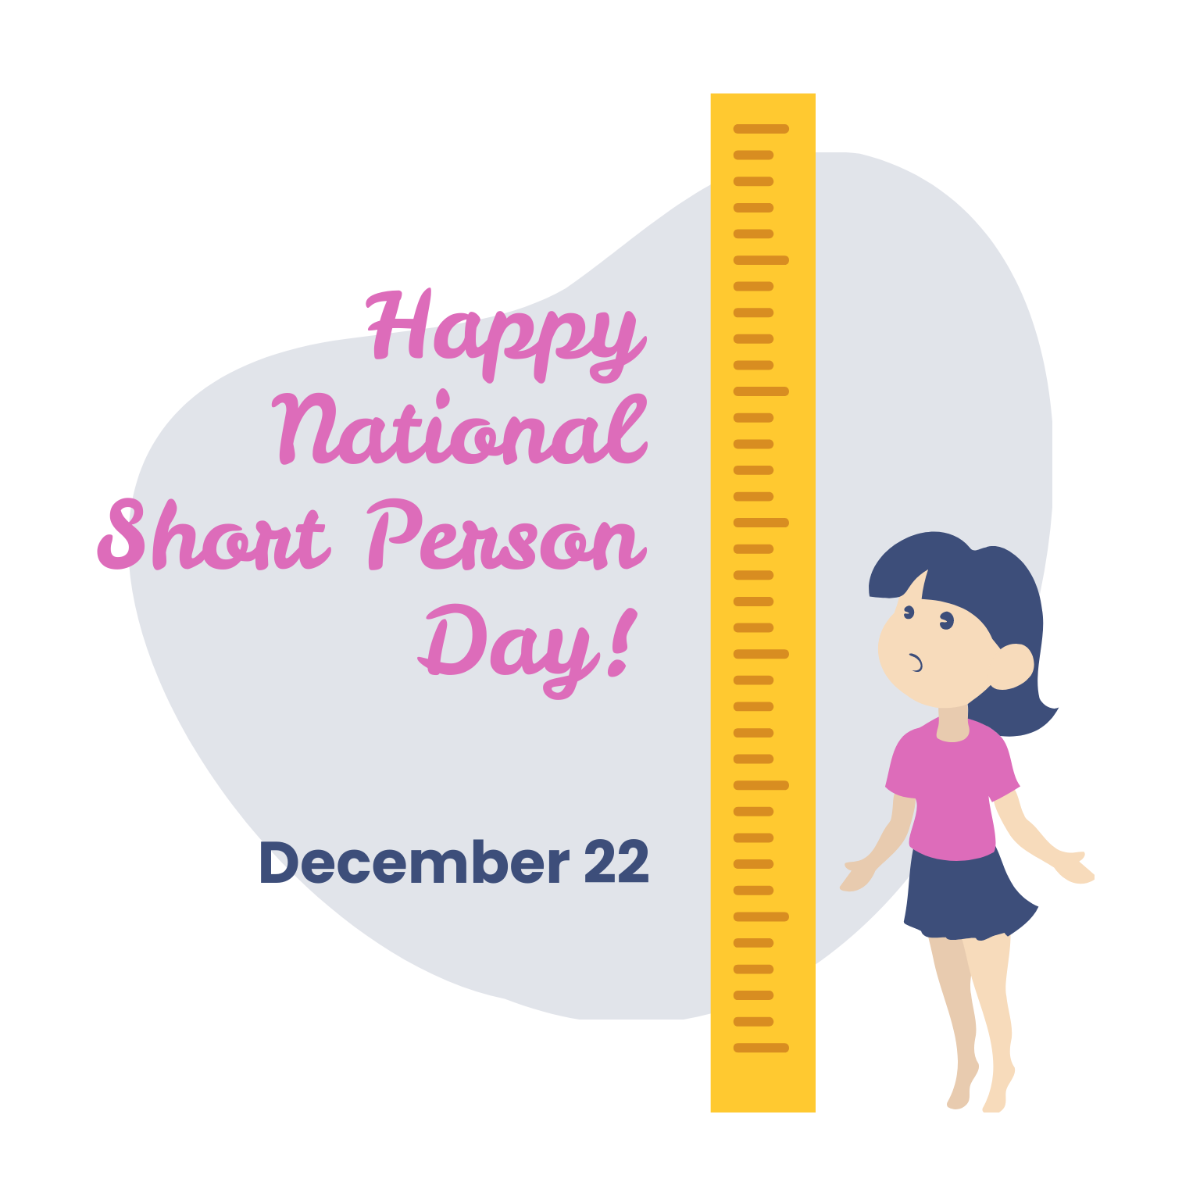 National Short Person Day Flyer Vector